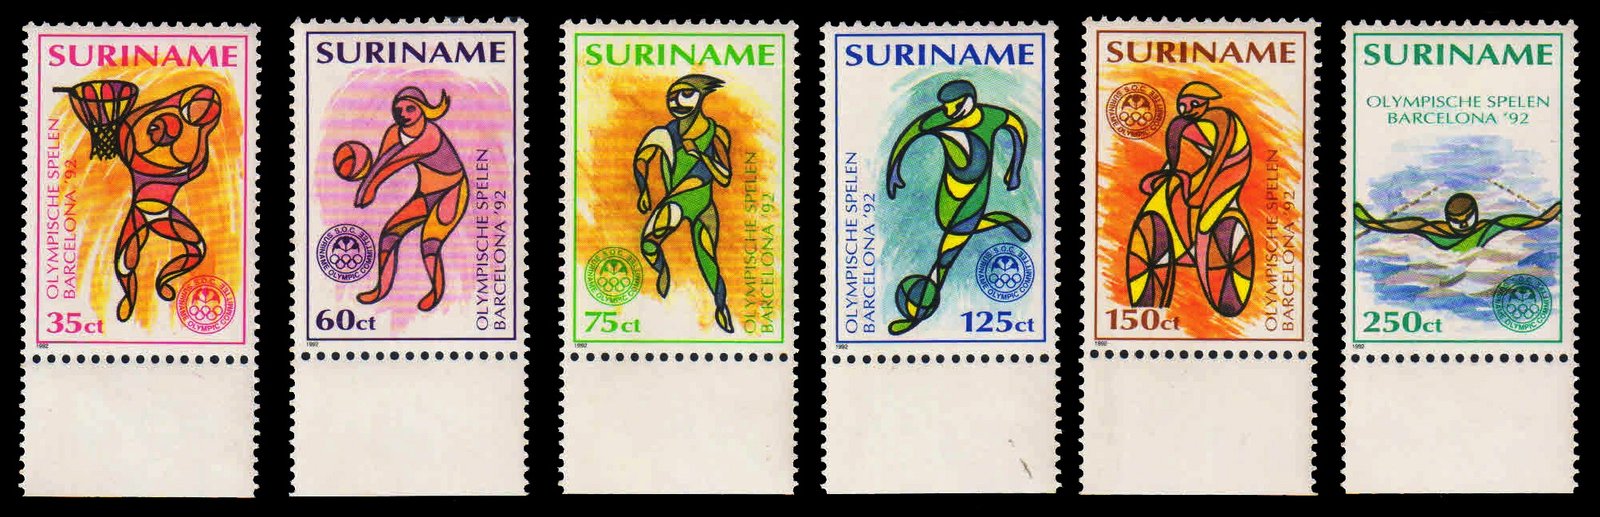 SURINAM 1972 - Olympic Games. Basketball, Volleyball, Sprinting, Football, Cycling, Swimming. Set of 6 Stamps, MNH Stamps. S.G. 1518-1523. Cat � 16